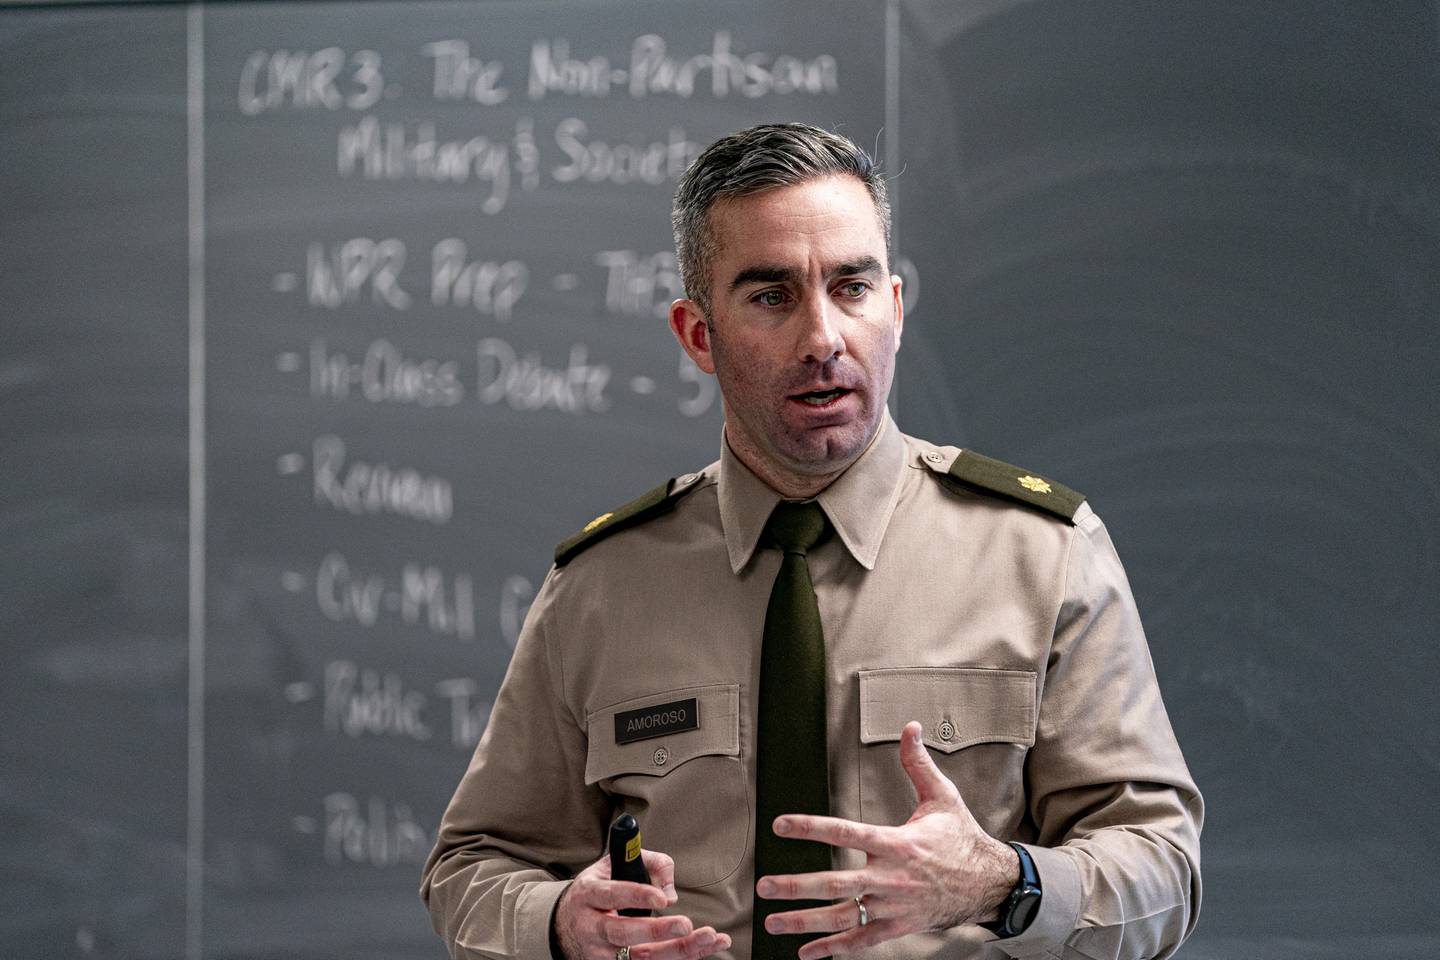 Maj. Joe Amoroso instructs cadets during a class on American politics at the U.S. Military Academy in West Point, N.Y., Wednesday, Nov. 29, 2023.